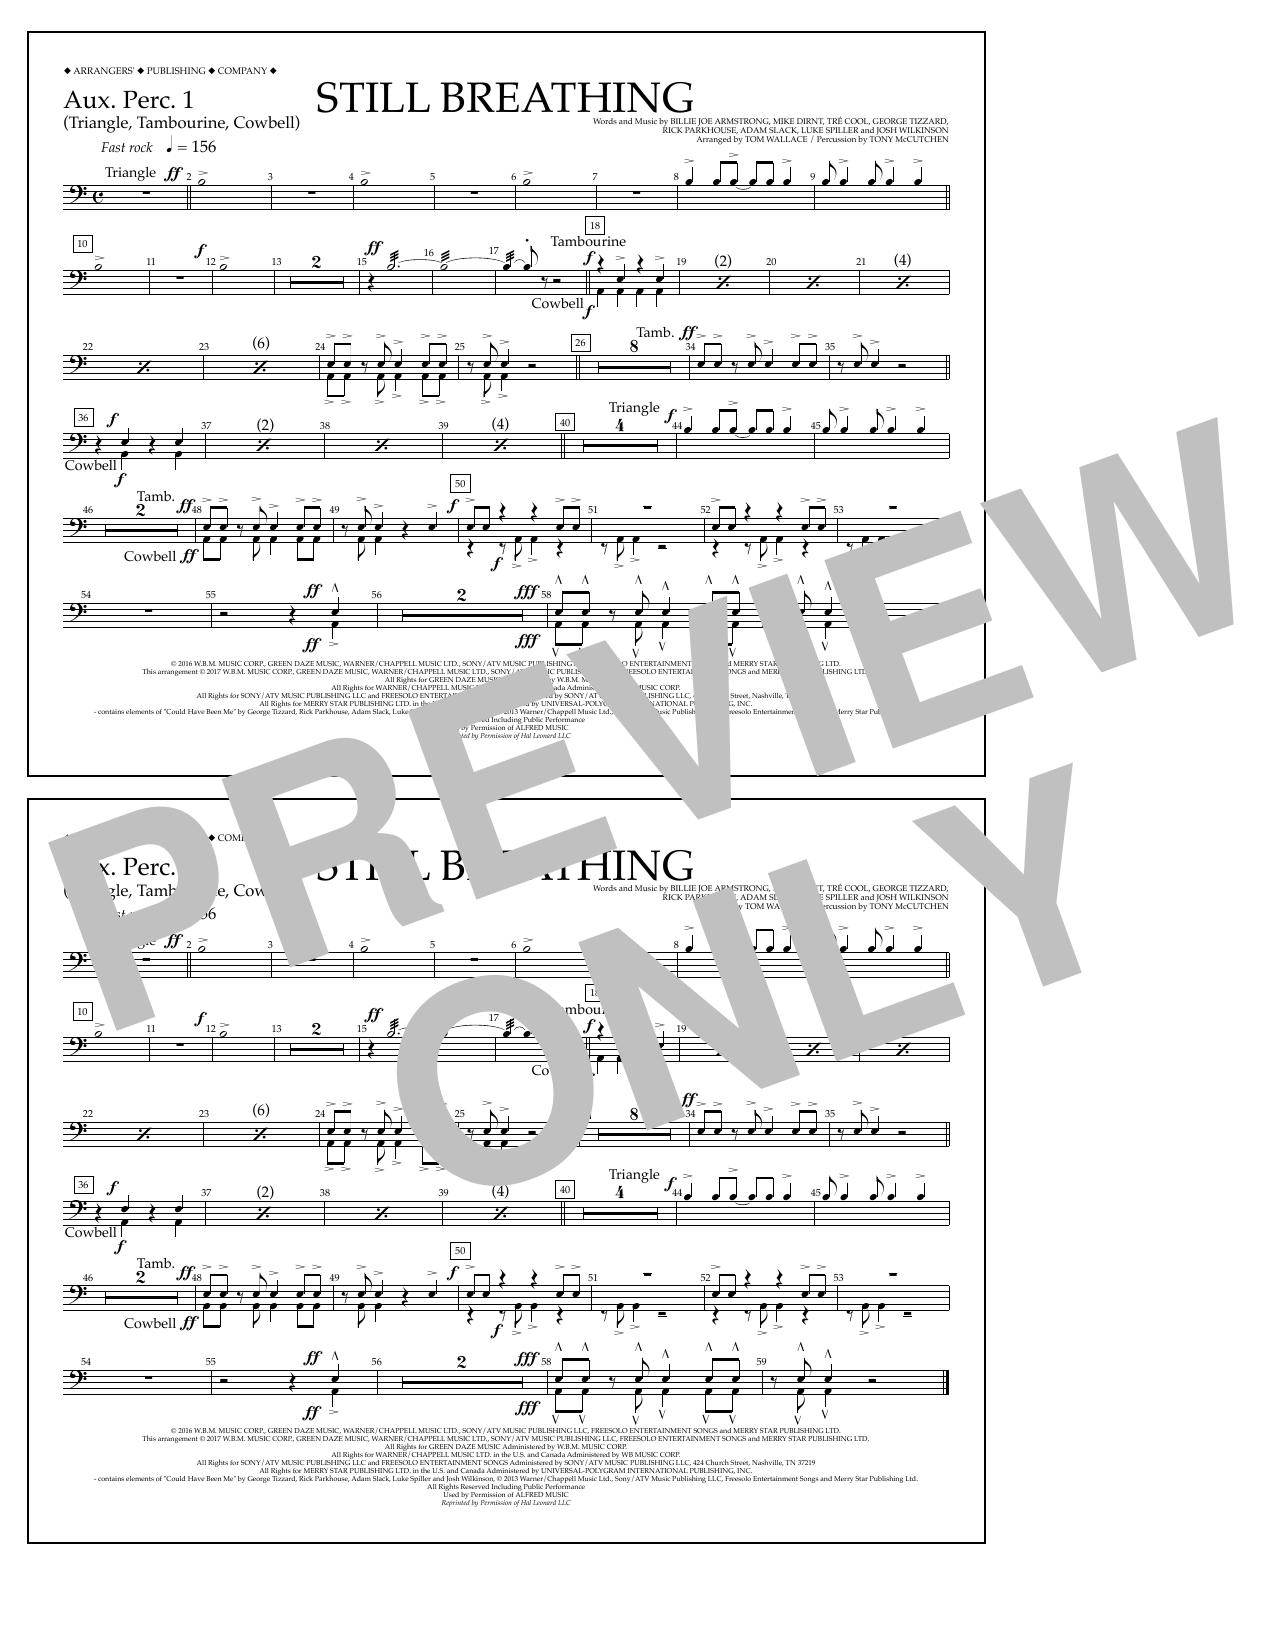 Download Tom Wallace Still Breathing - Aux. Perc. 1 Sheet Music